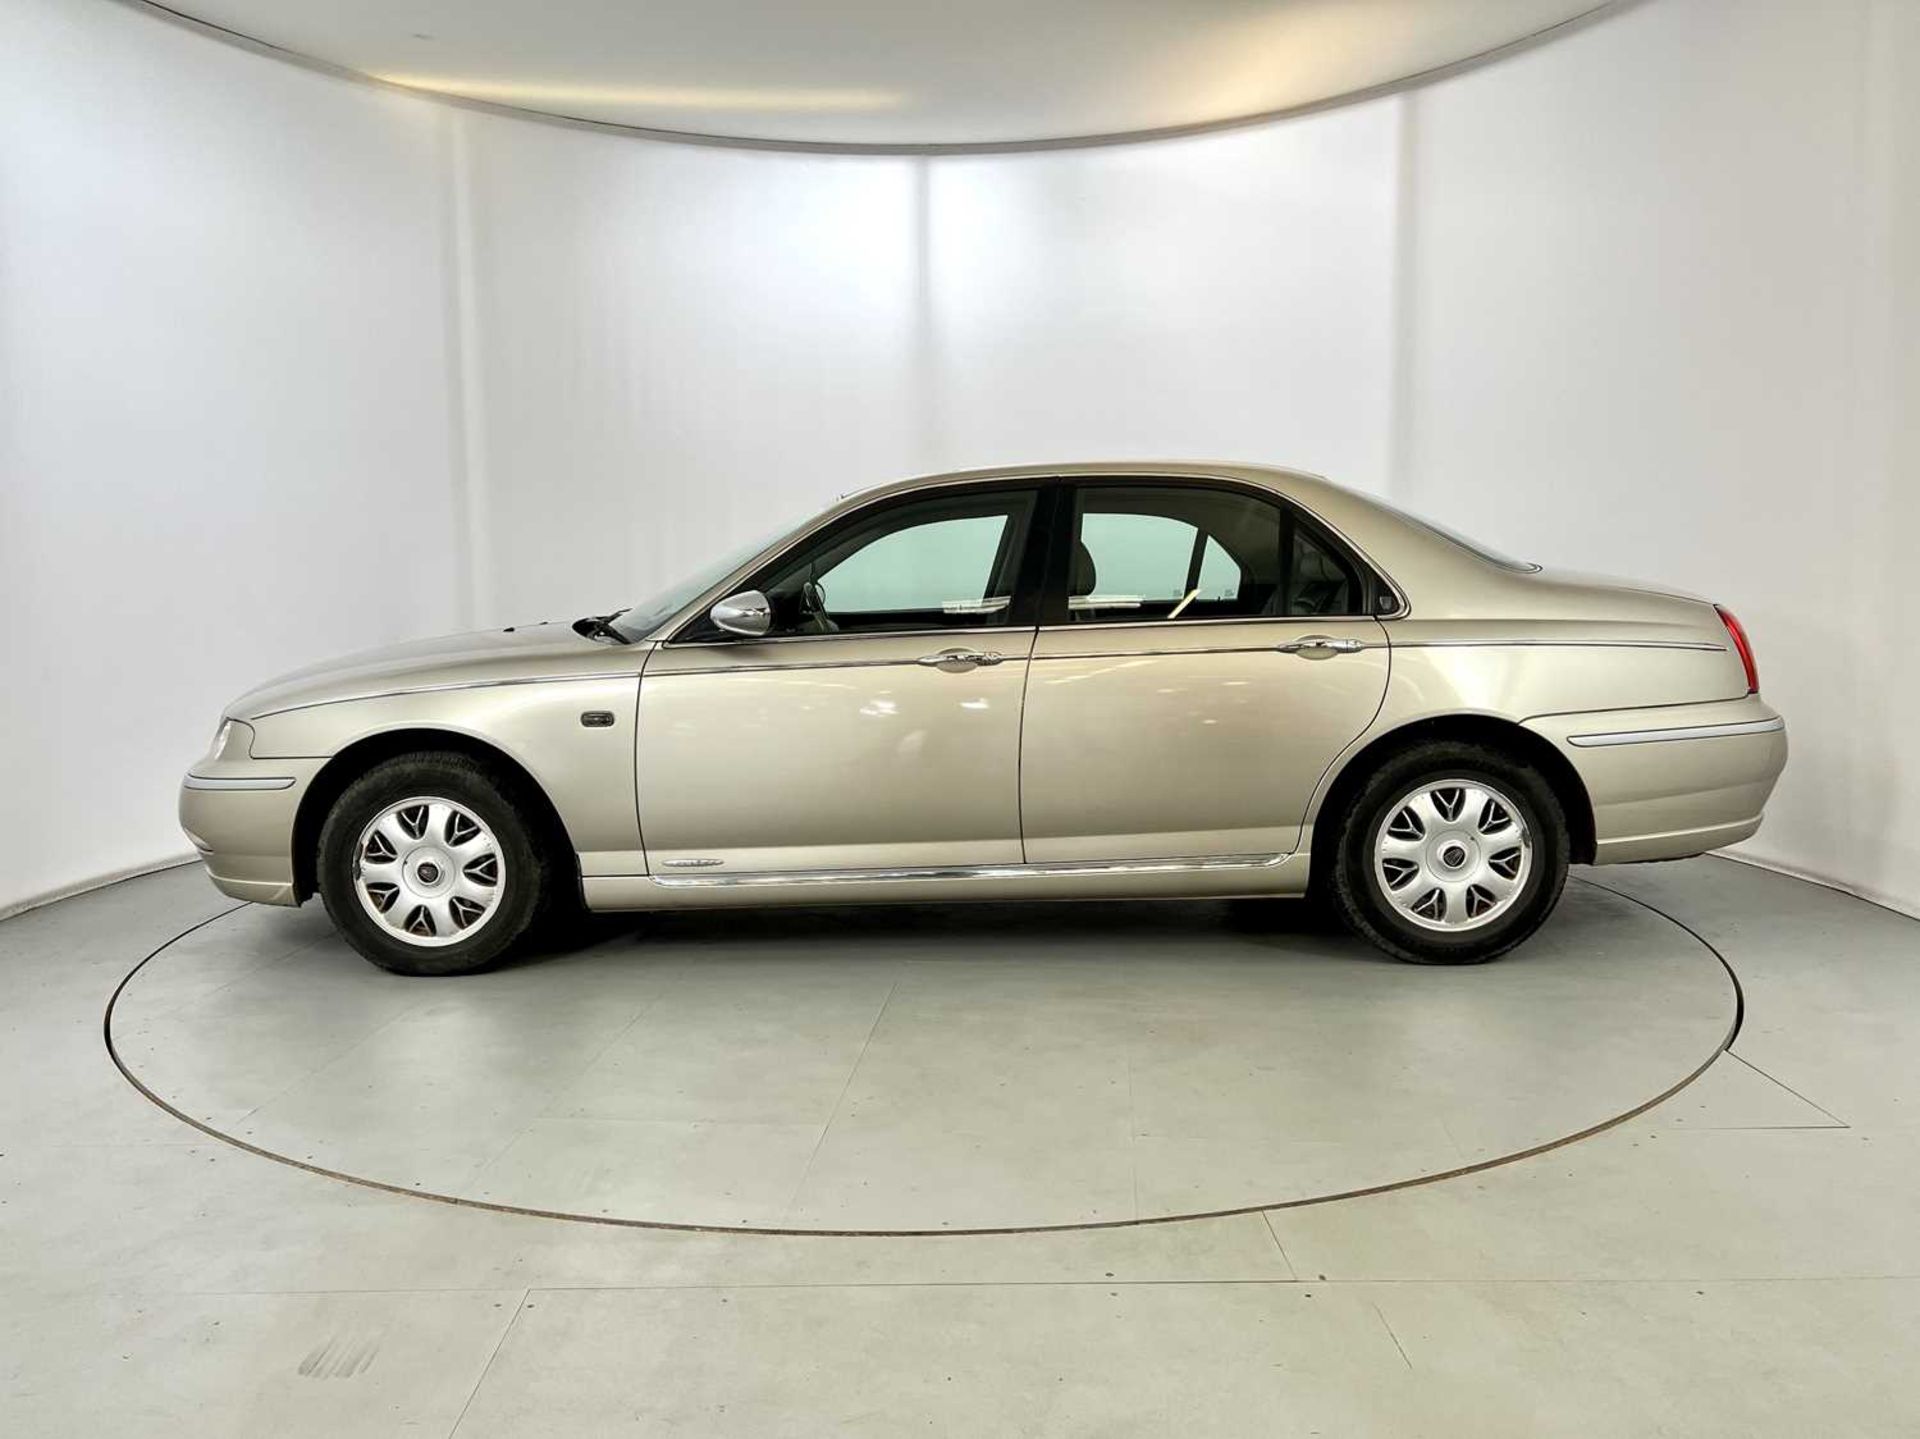 2000 Rover 75 Connoisseur - Image 5 of 34